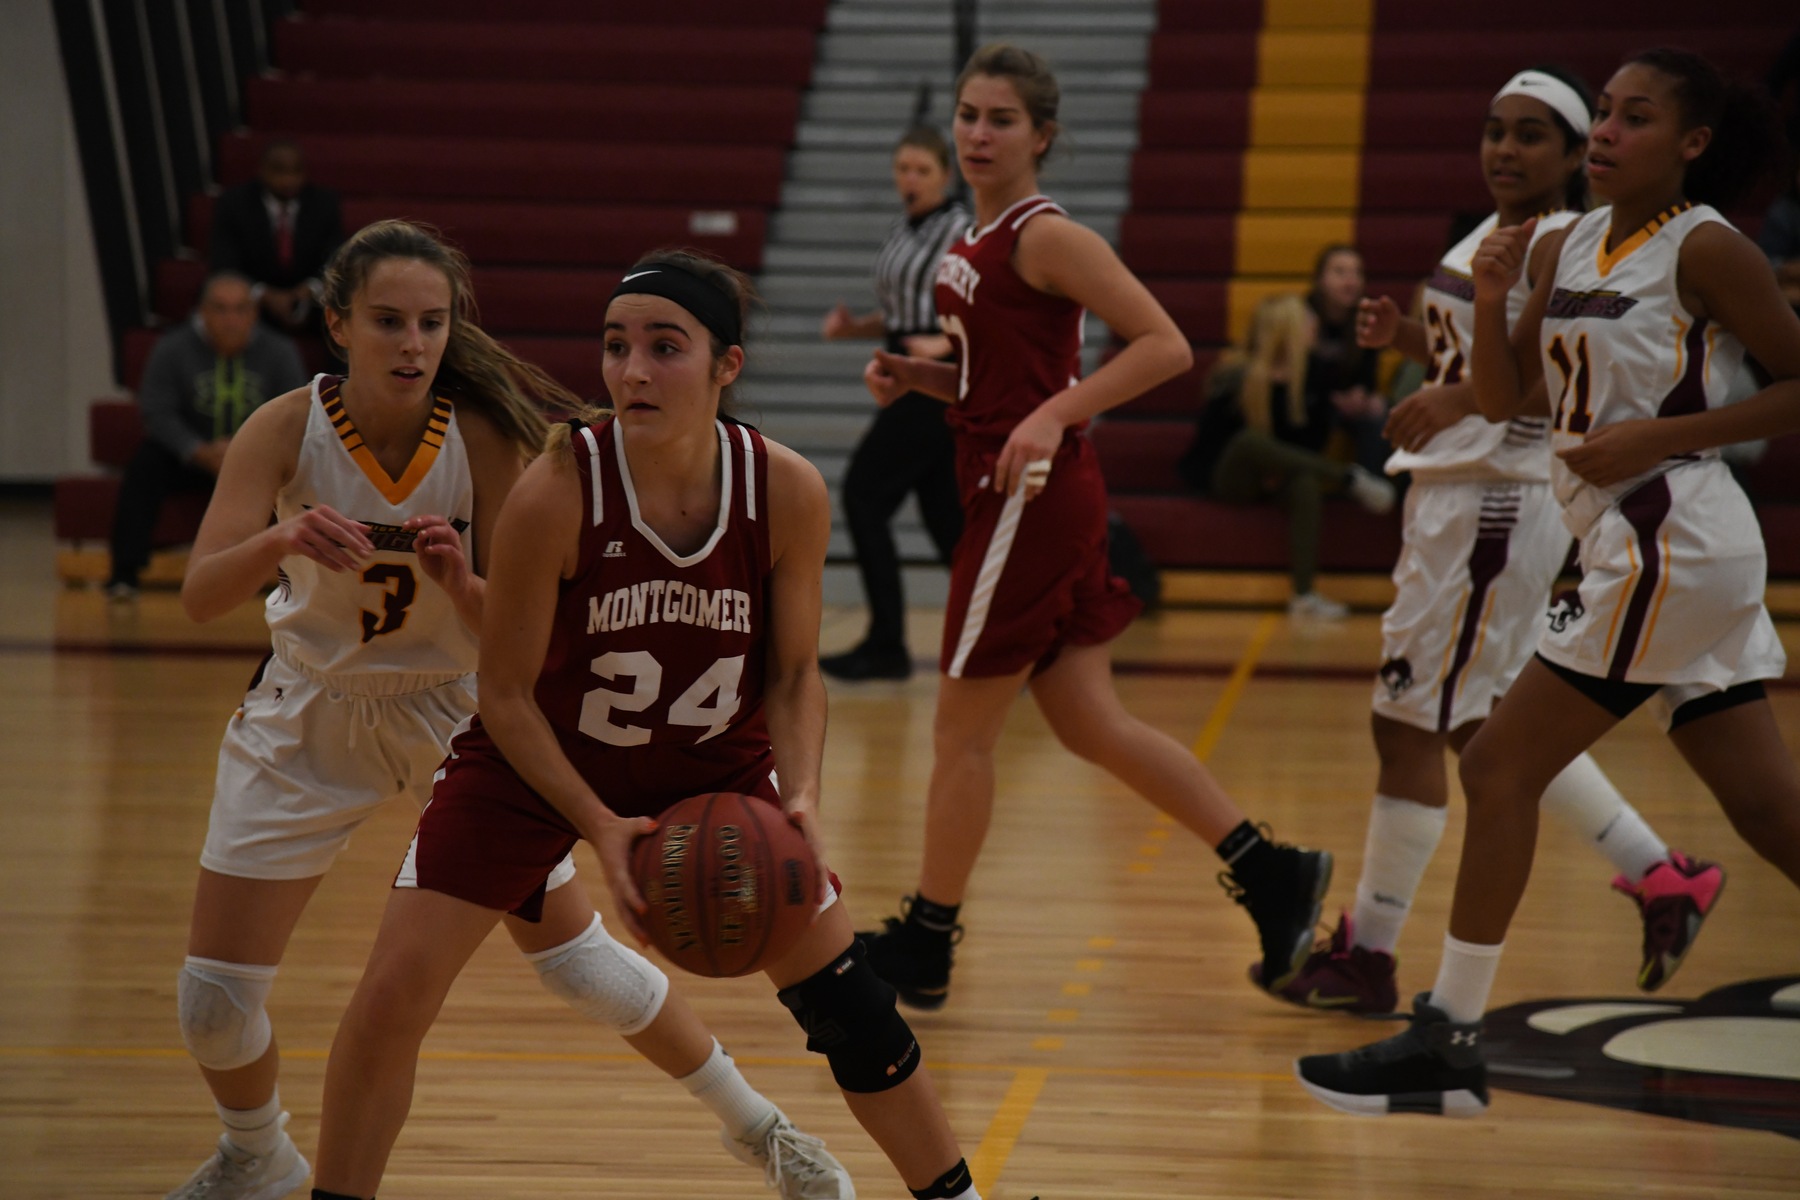 Dominant Win Over Lehigh Carbon Clinches Conference Tournament #2 Seed for Women's Basketball